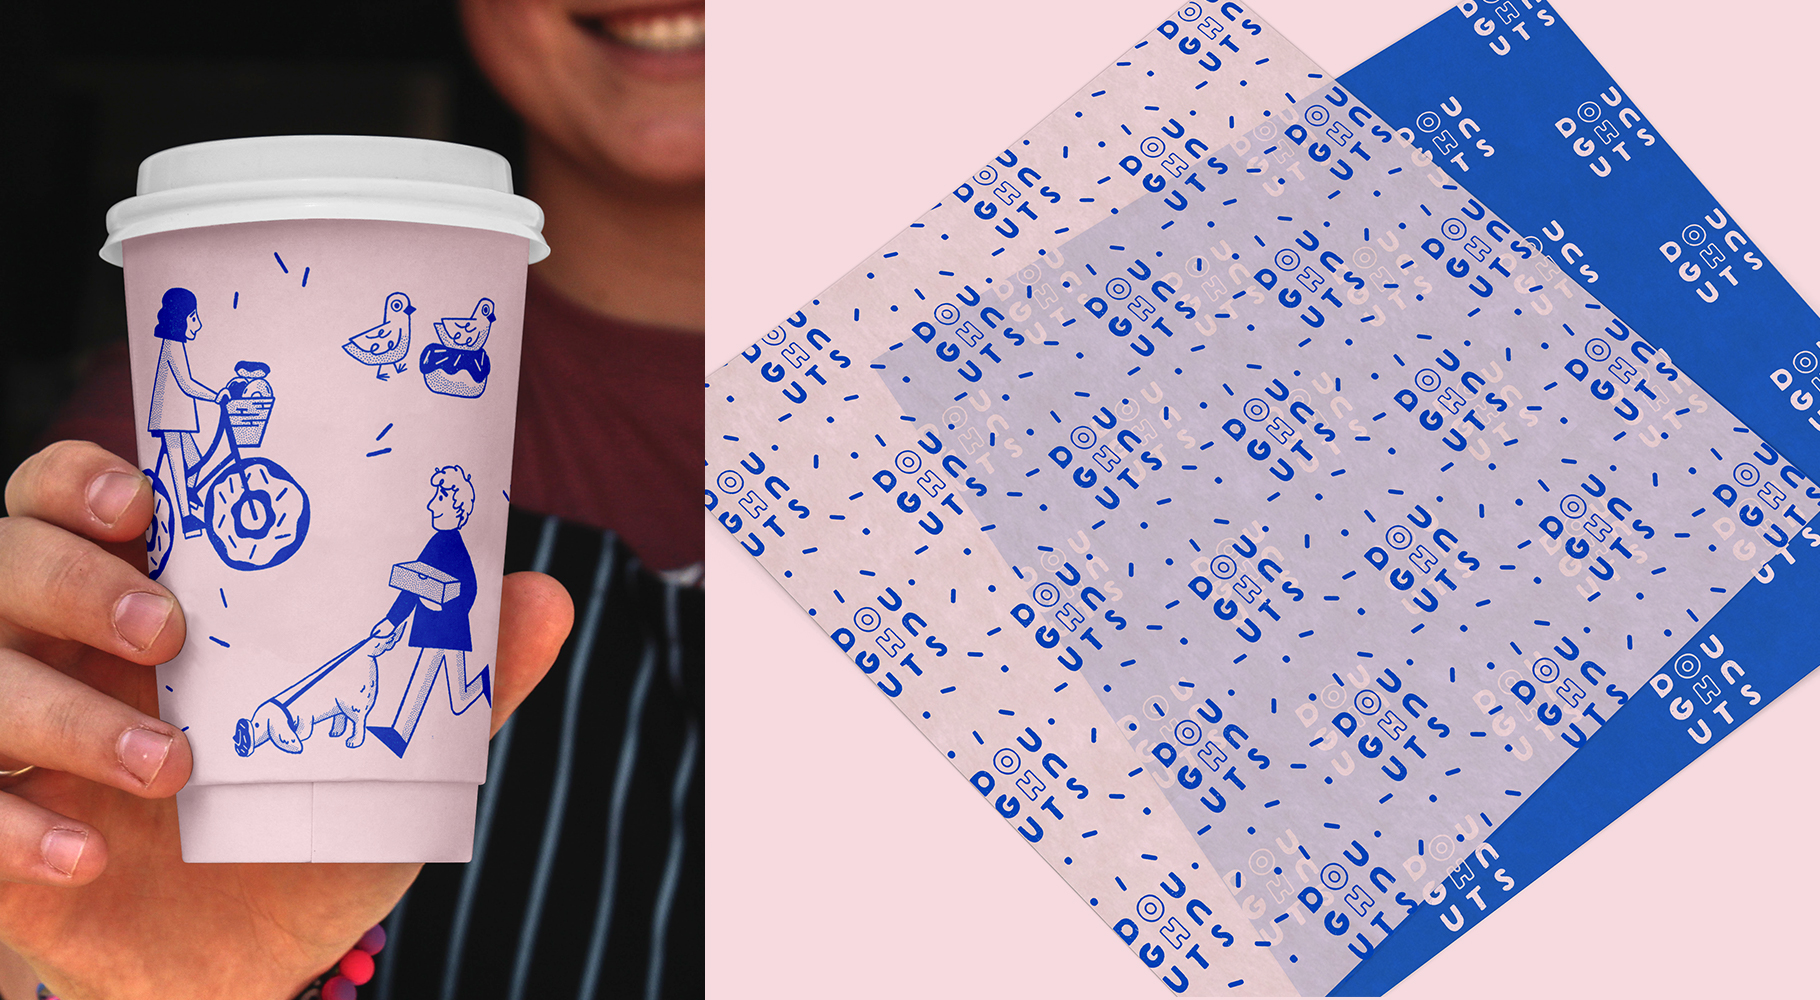 An image of a cup design for an Oh Doughnuts rebrand, featuring illustrations of a pigeon with a doughnut nest, a girl riding a doughnut bike and a man walking a dog who is sniffing a doughnut. Also featured to the right is an image of a wax paper design featuring a modular Oh Doughnuts logo and sprinkle pattern. Both elements are designed in blue and pink.